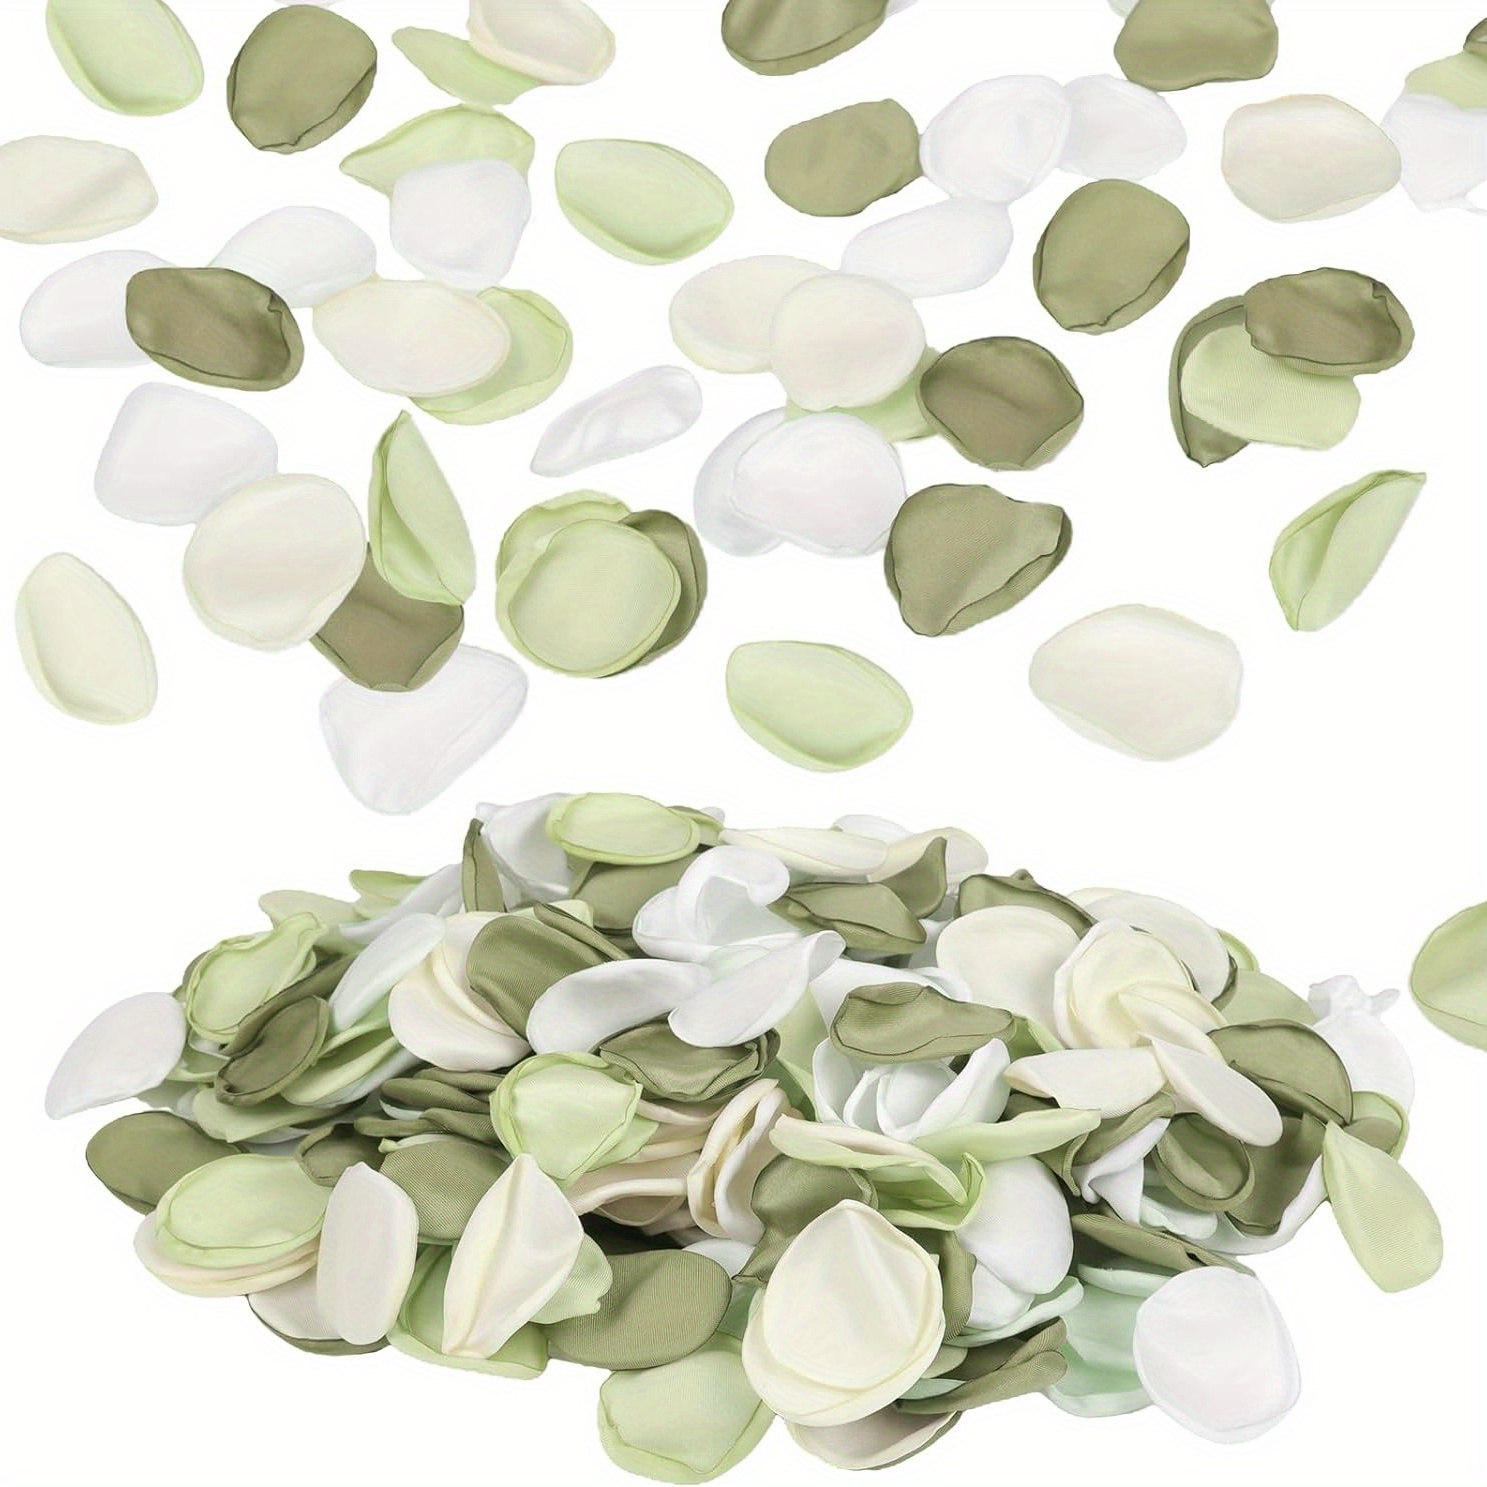 

Silk Rose Petals For Wedding And Engagement Decorations, Artificial Green Petals For Aisle, Table, And Party Decor - 150/300/450 Pack